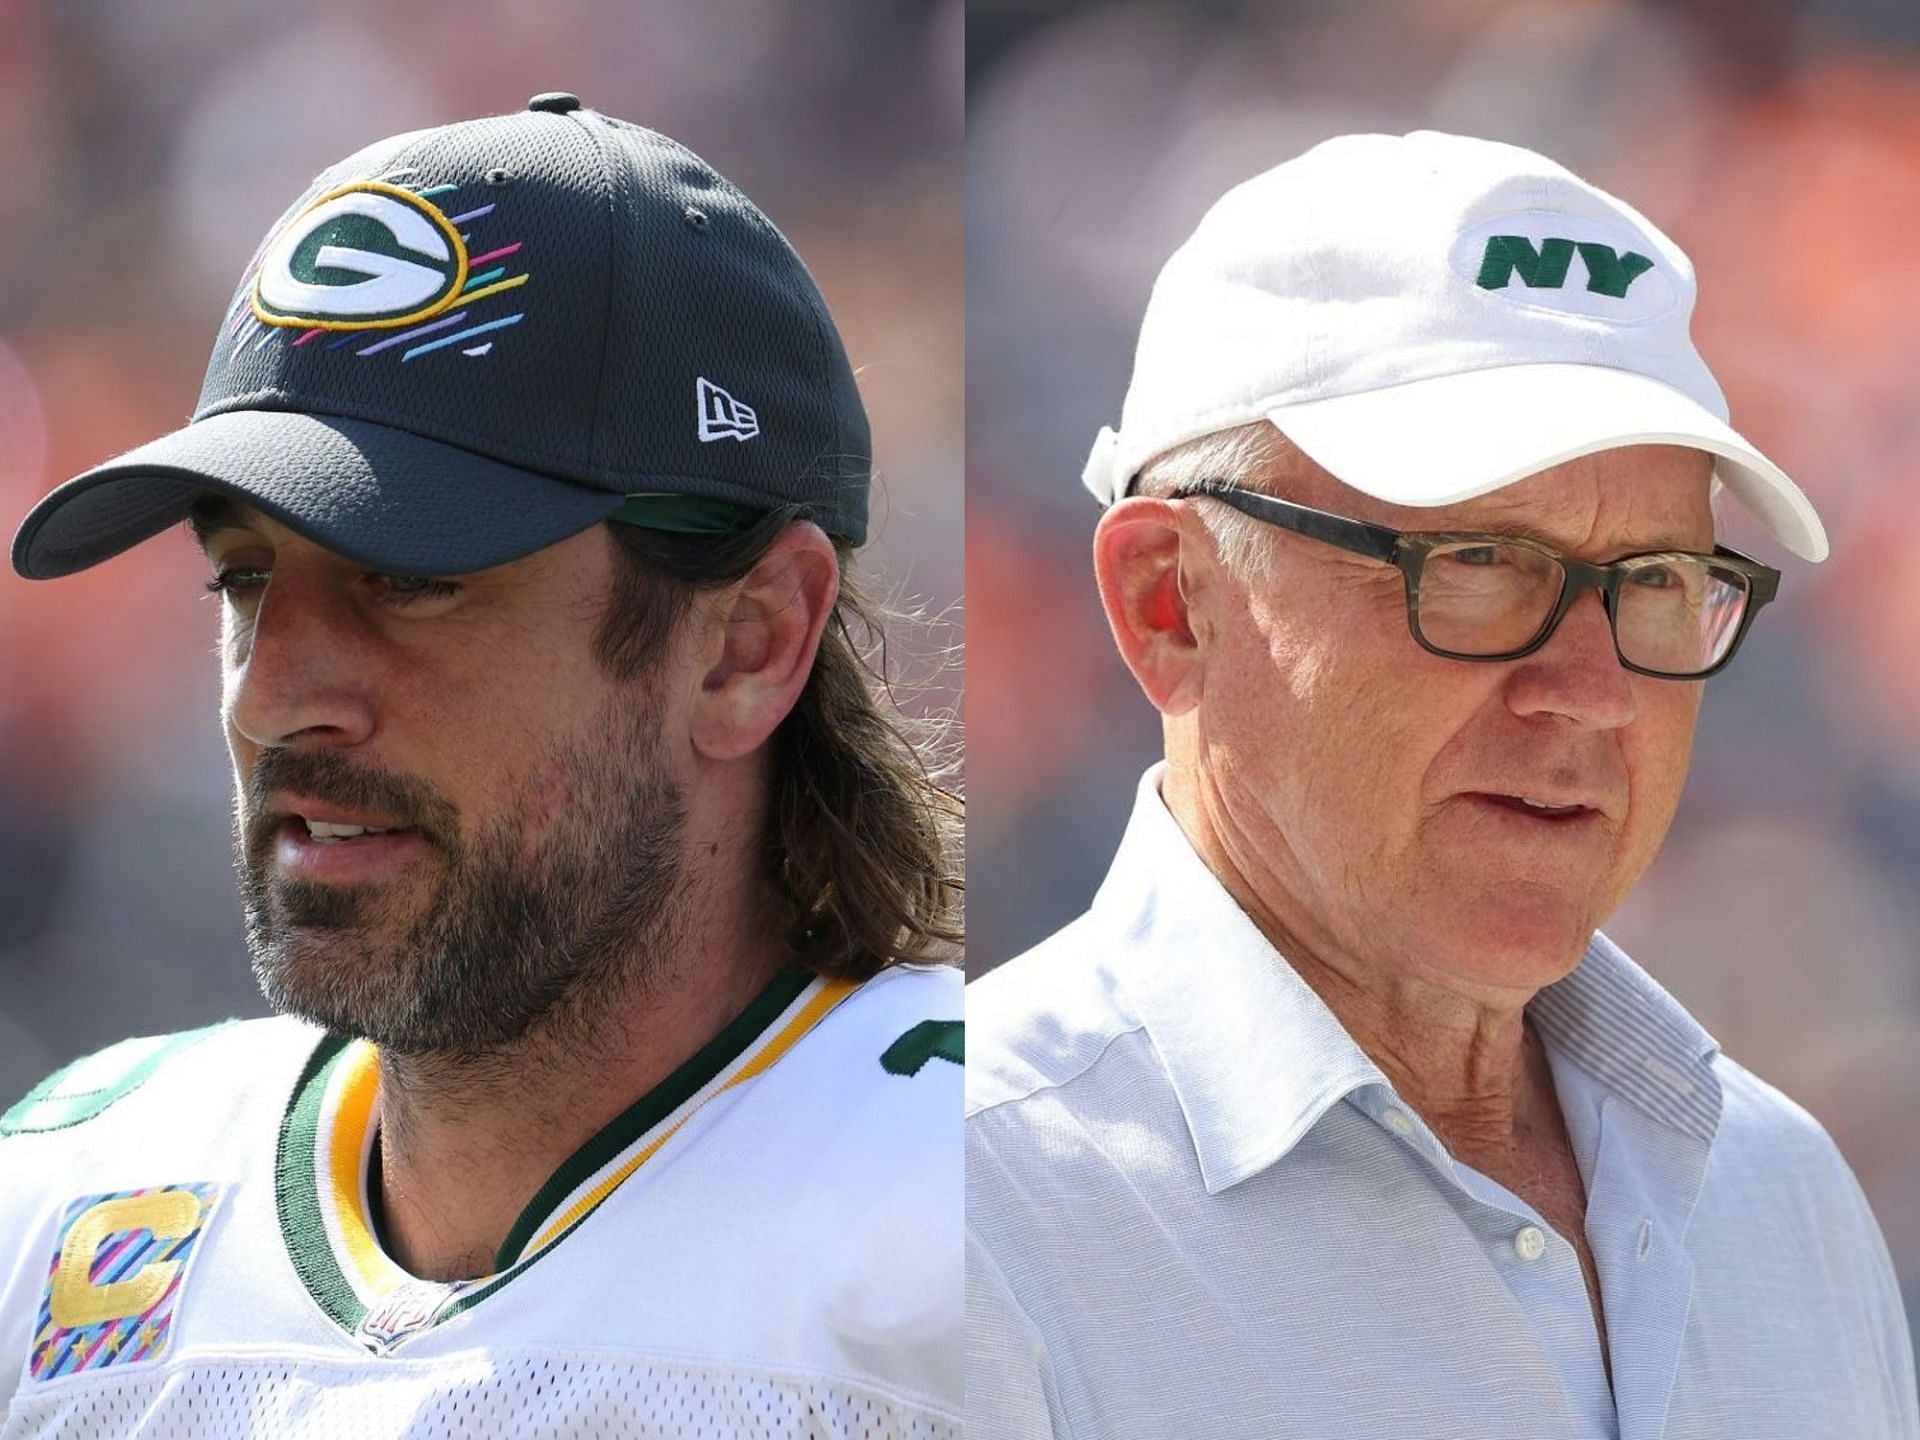 Aaron Rodgers gets courted by Jets GM Woody Johnson